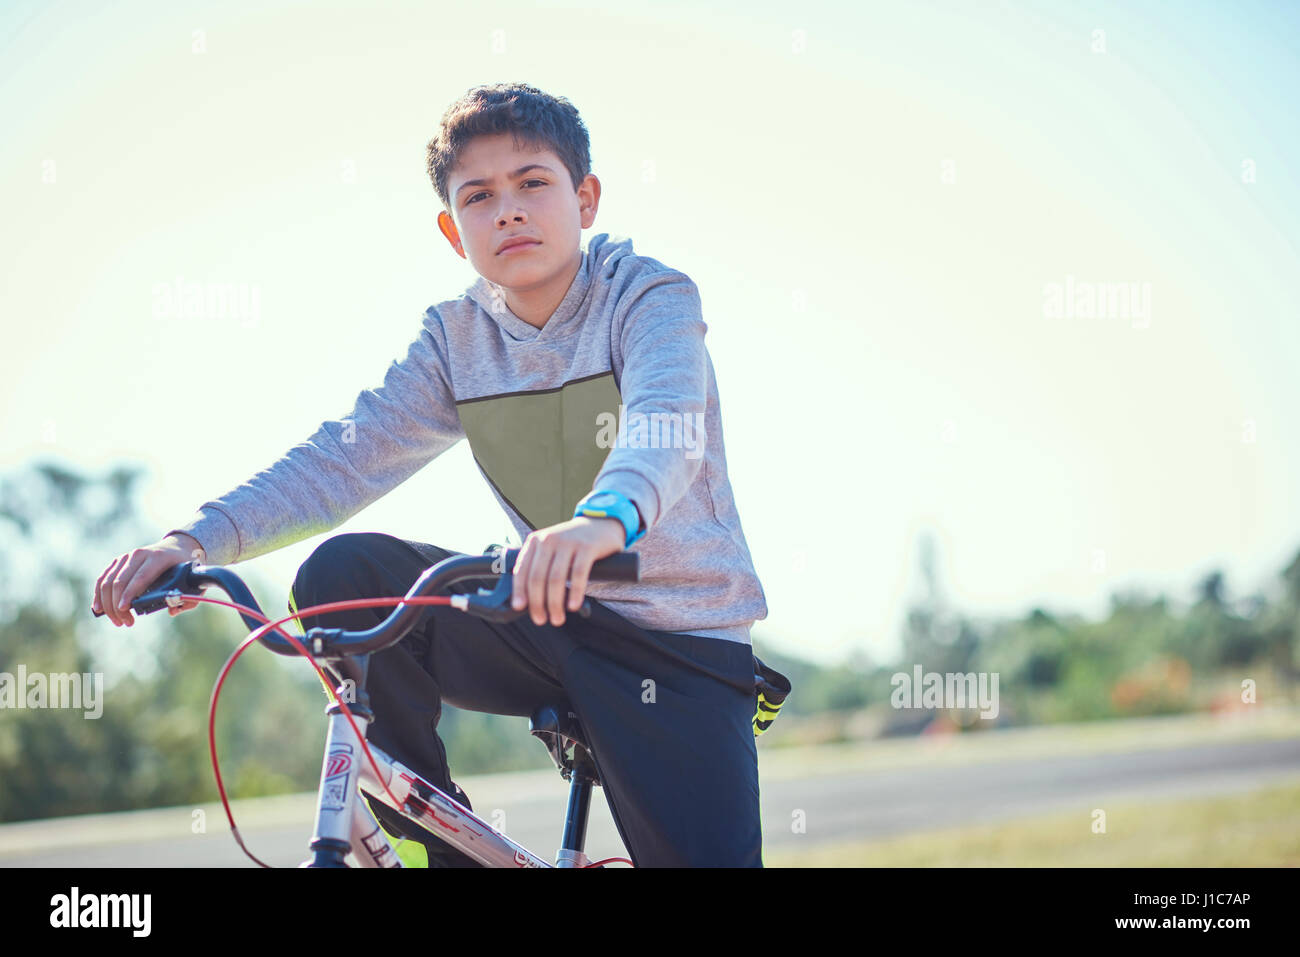 Cycle photography | Cycling, Poses, Bicycle